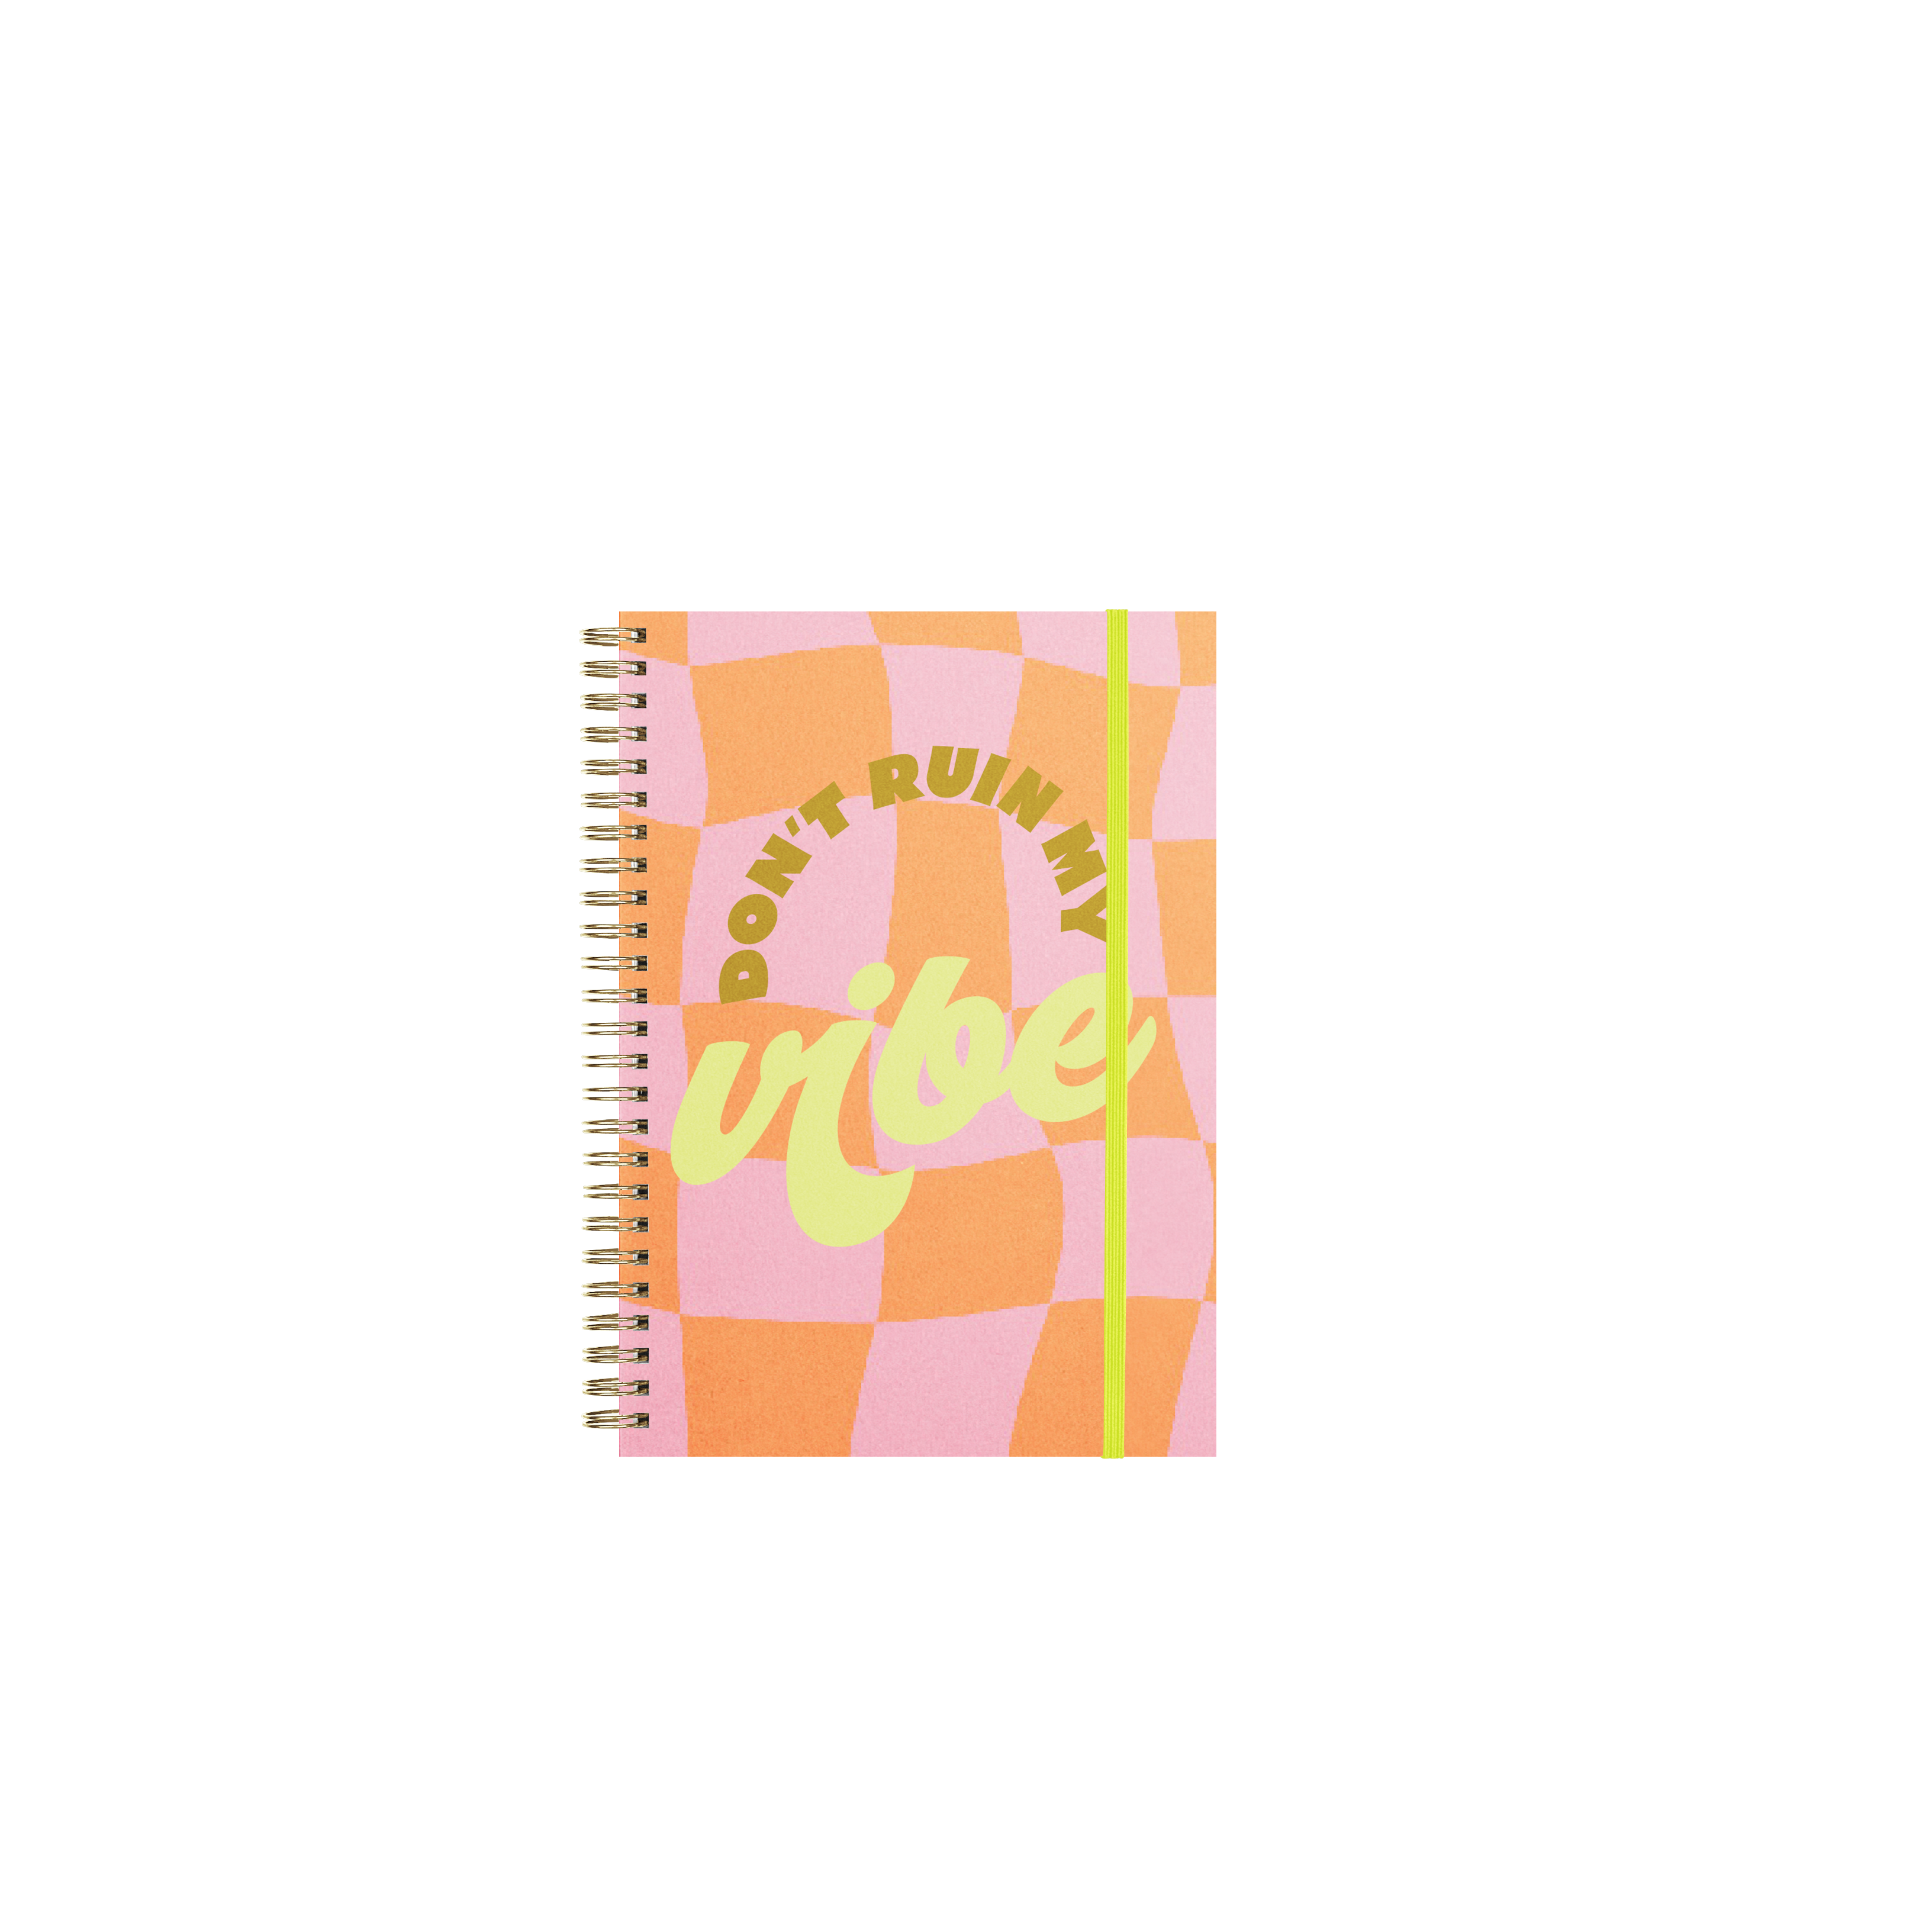 Talking Out of Turn Undated Perpetual Goal Getter Lite Planner, Small - Don't Ruin My Vibe